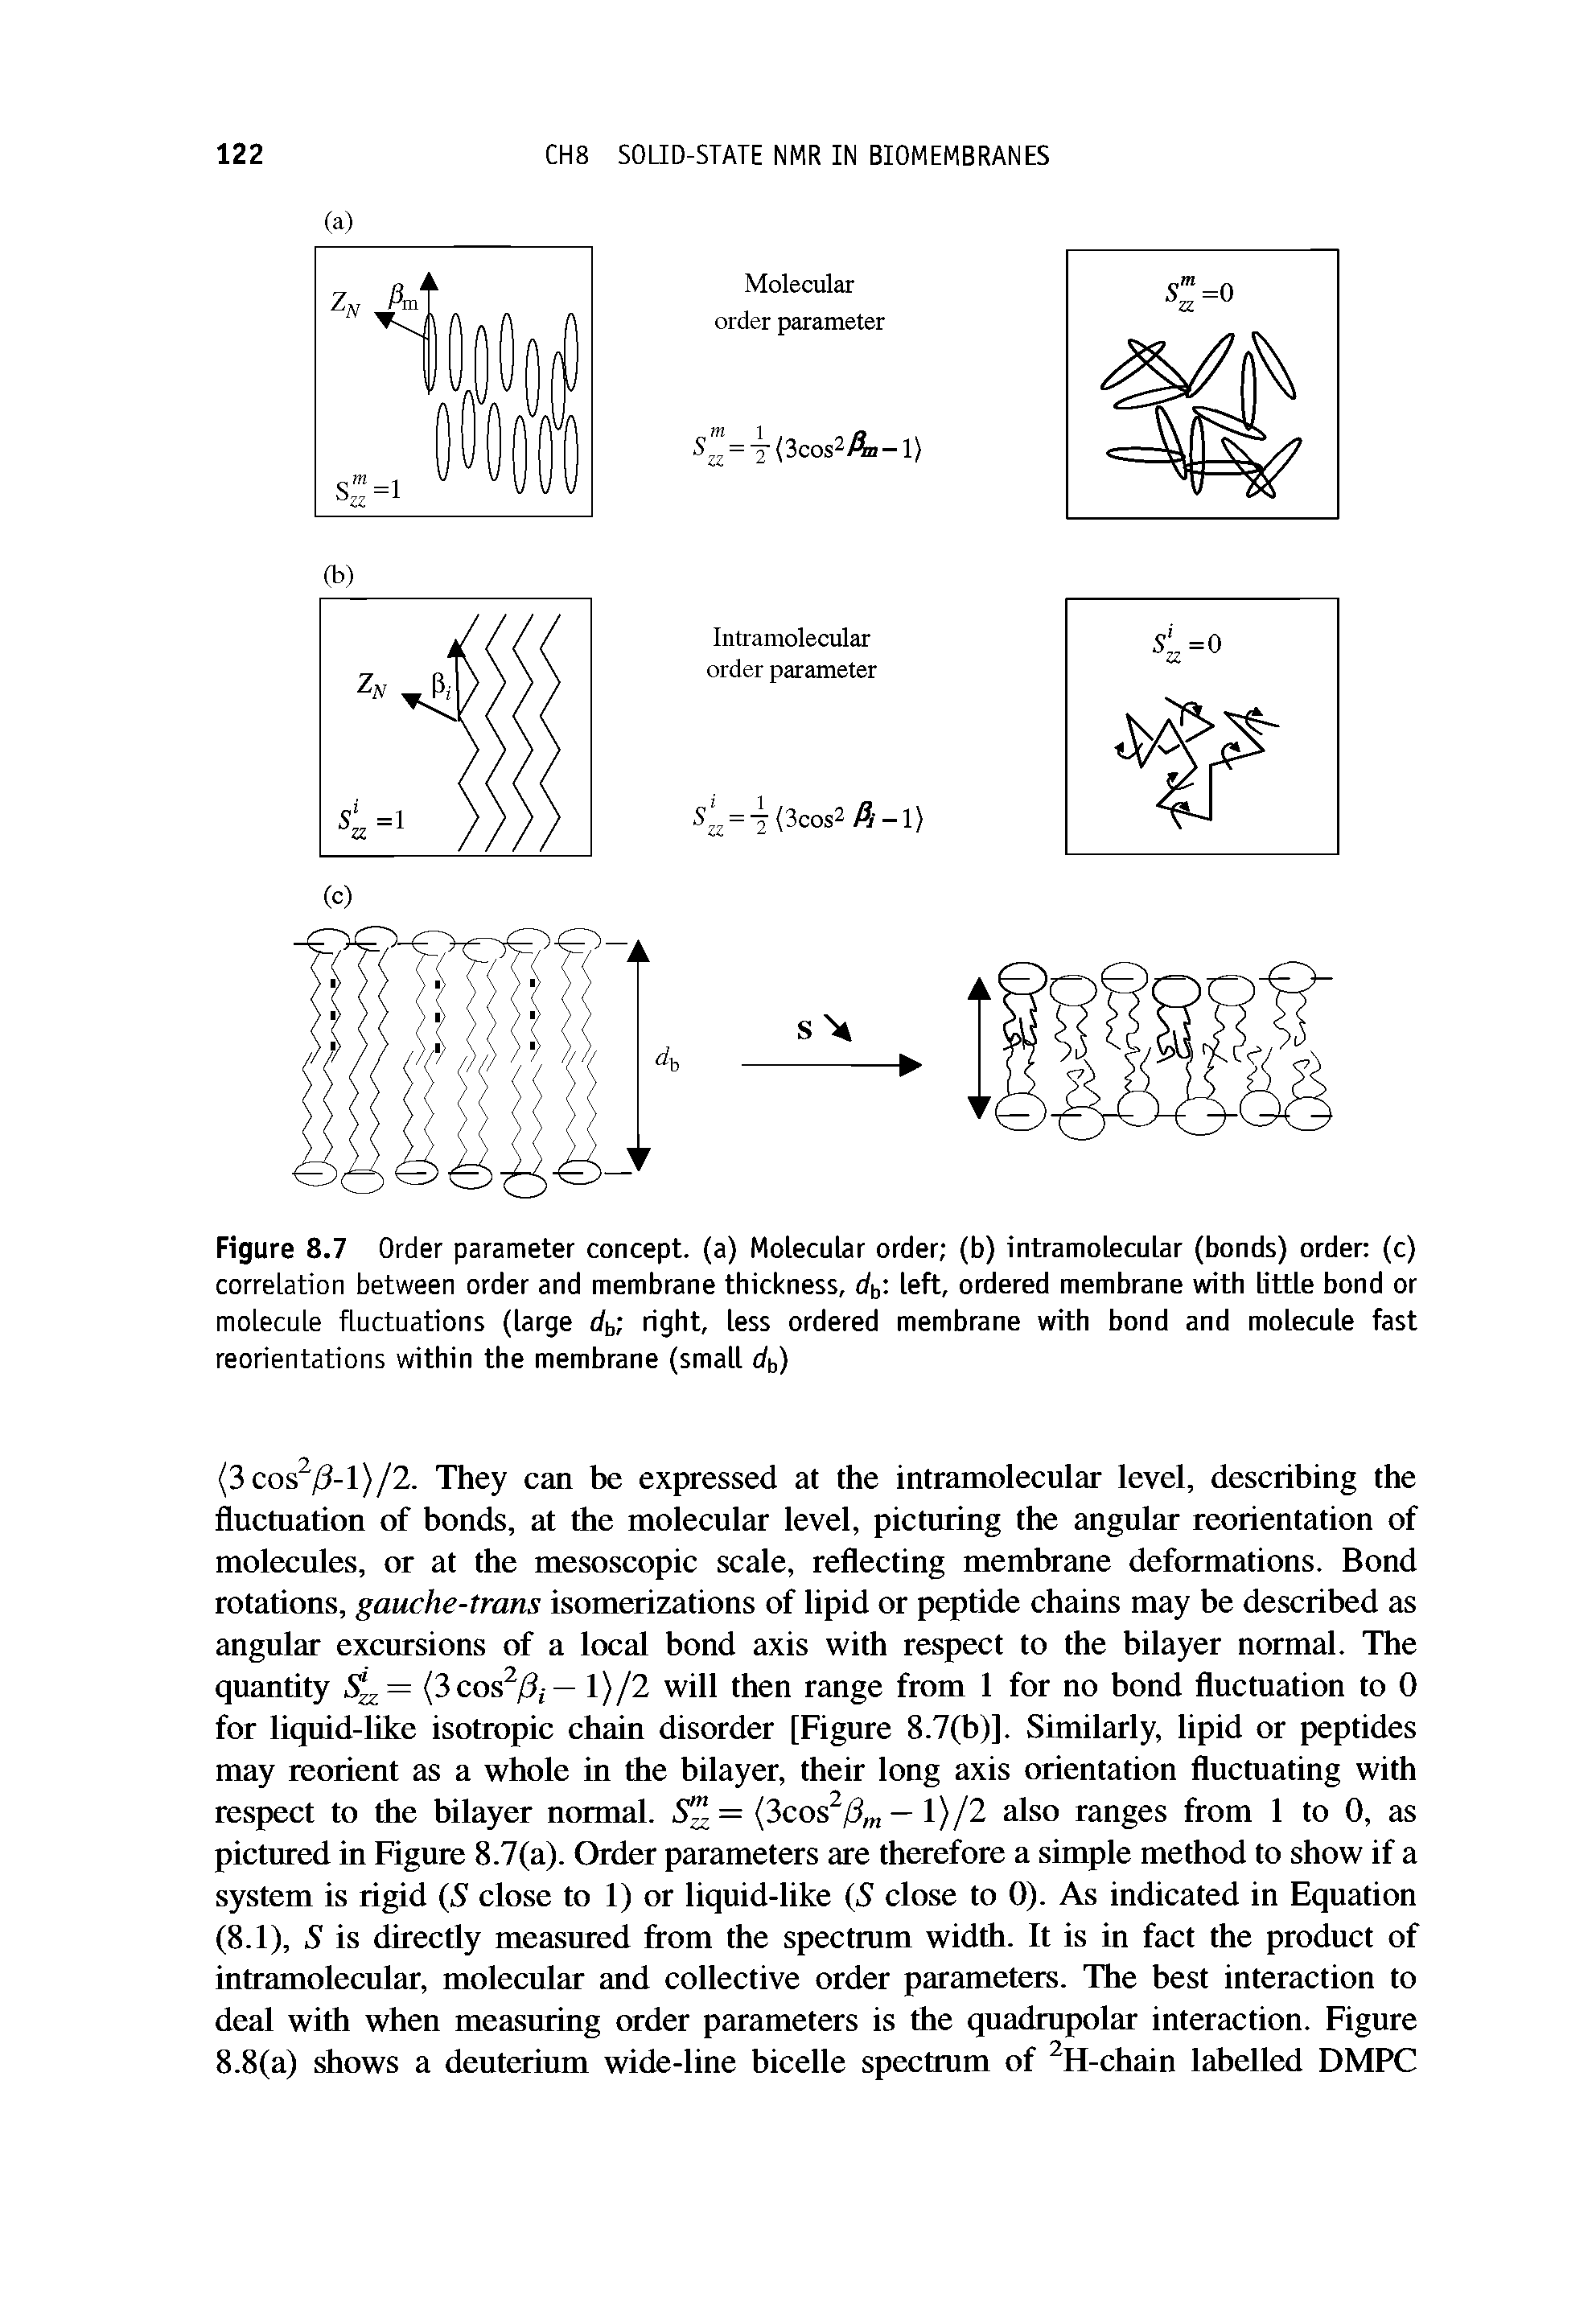 Figure 8.7 Order parameter concept, (a) Molecular order (b) intramolecular (bonds) order (c) correlation between order and membrane thickness, dt, left, ordered membrane with little bond or molecule fluctuations (large dt, right, less ordered membrane with bond and molecule fast reorientations within the membrane (small db)...